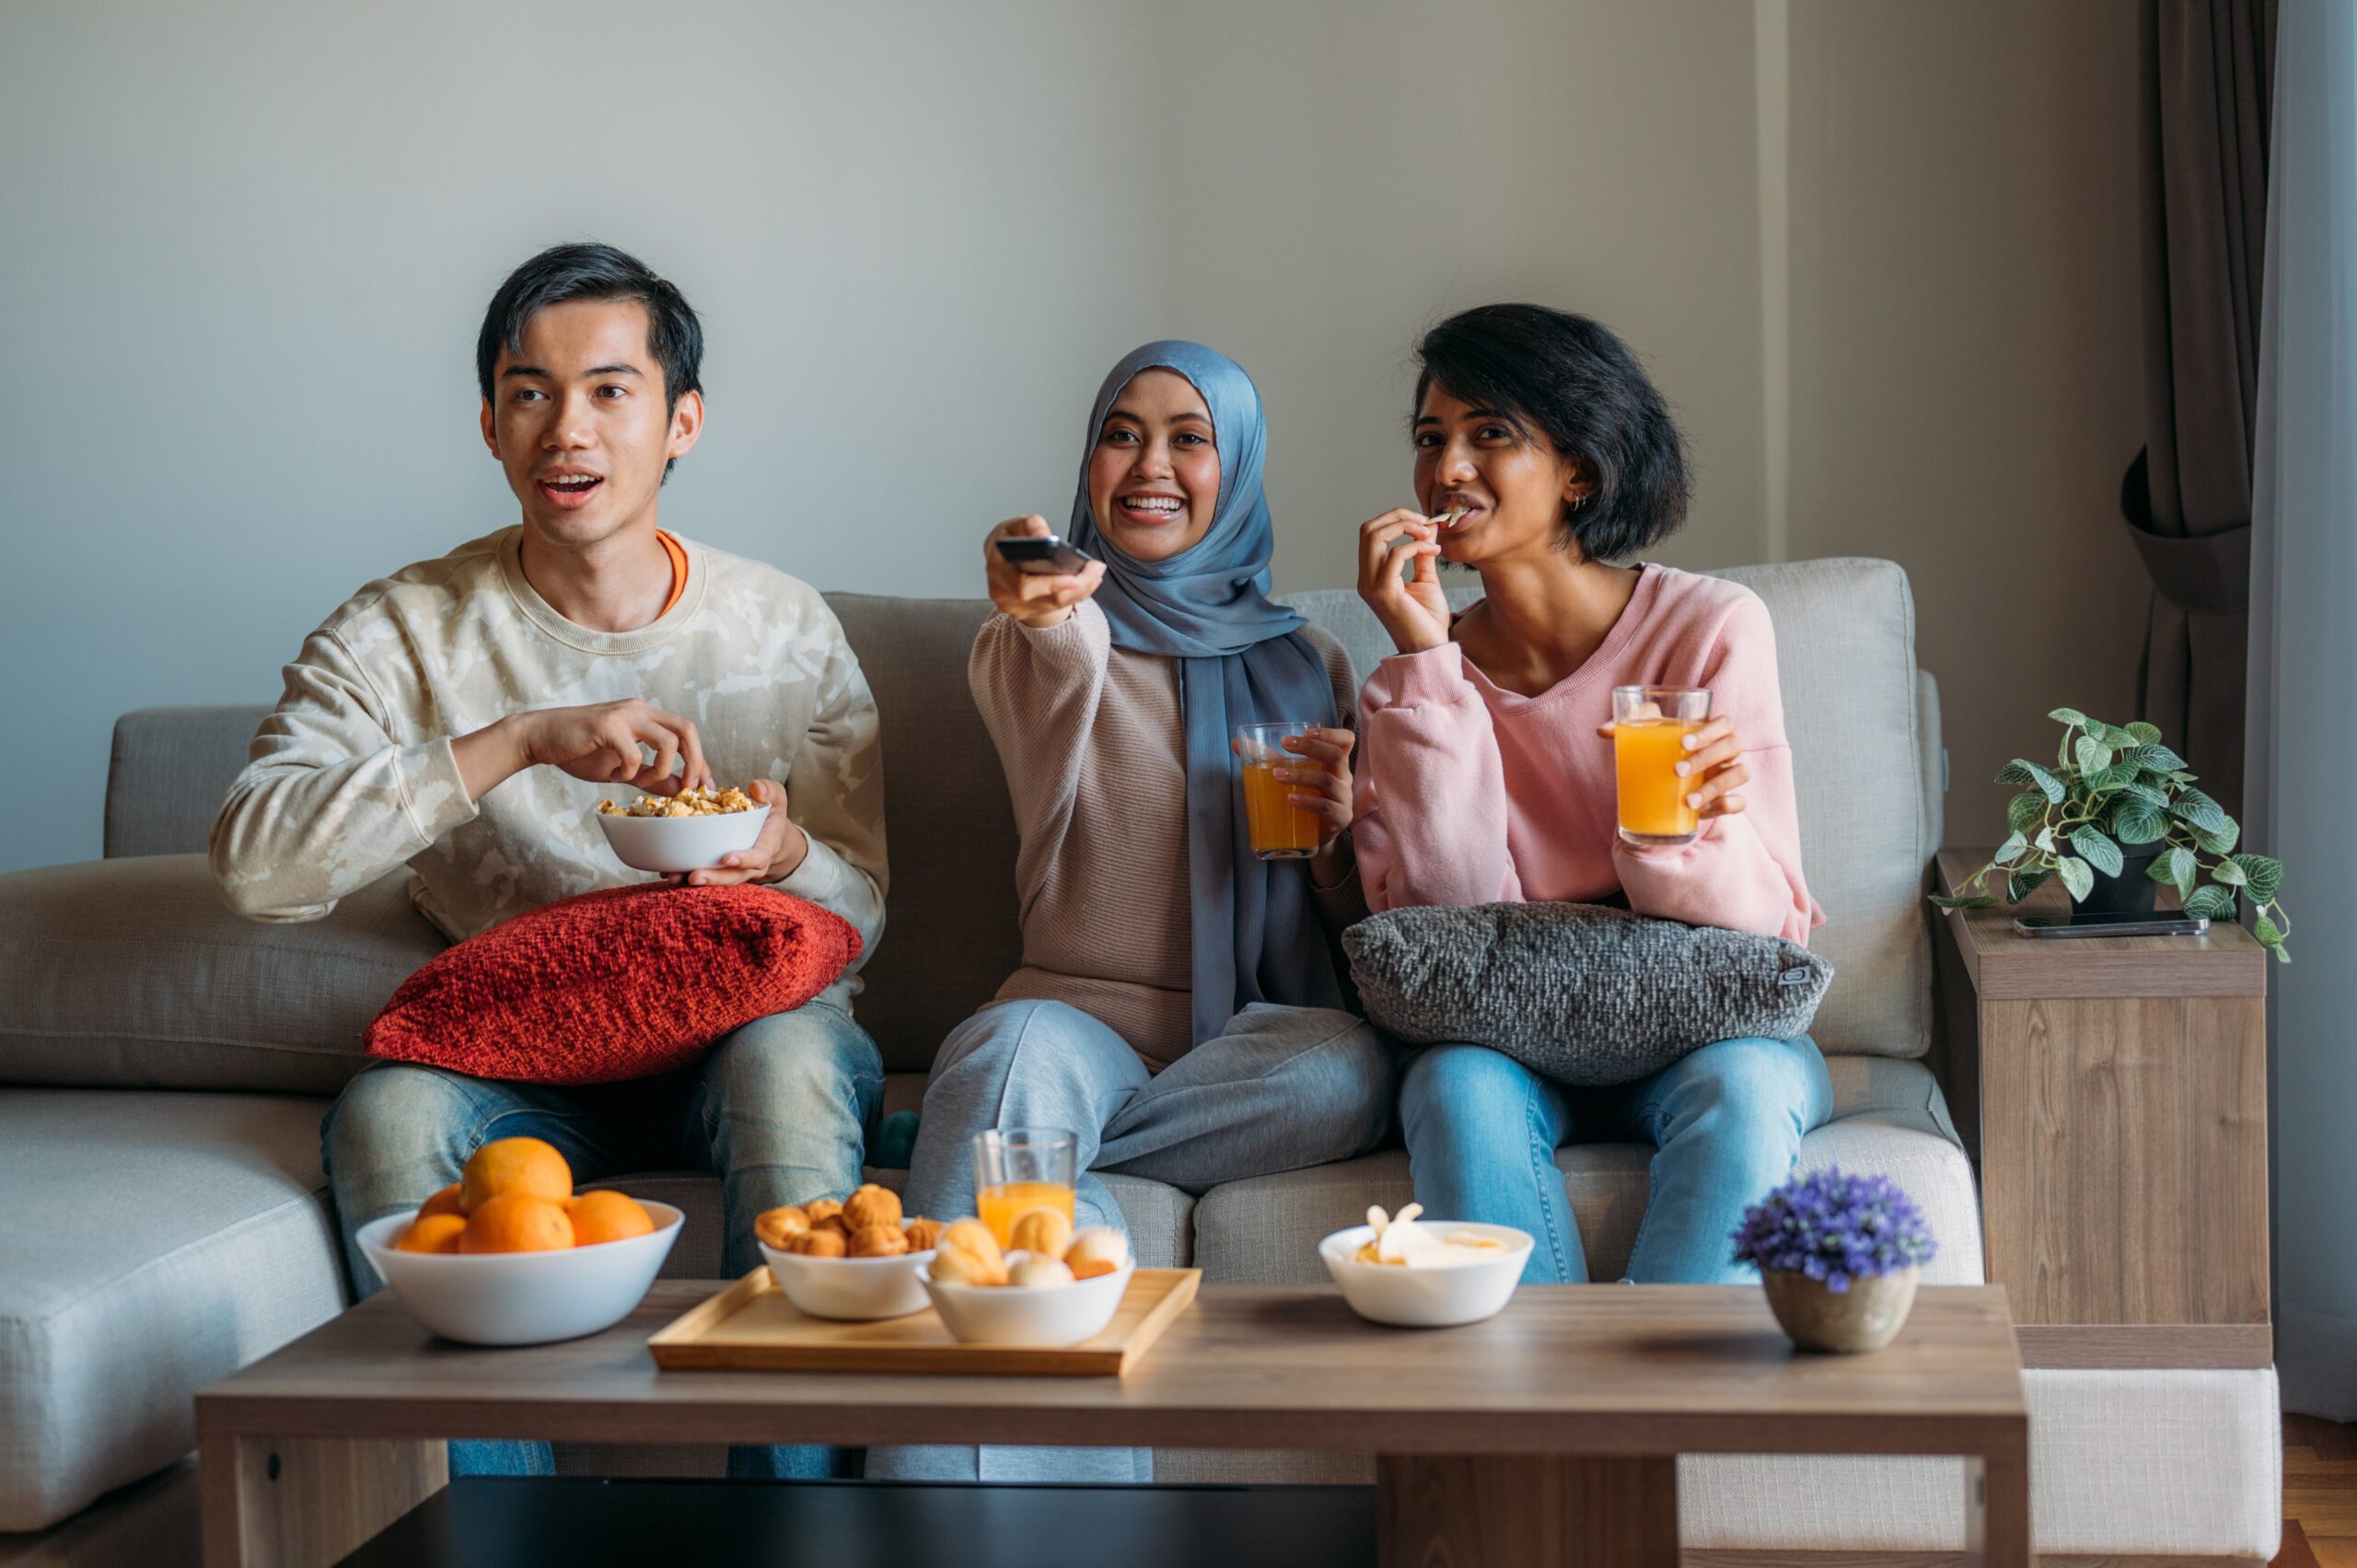 a group of three people sit together on a couch while drinking orange beverages from cups